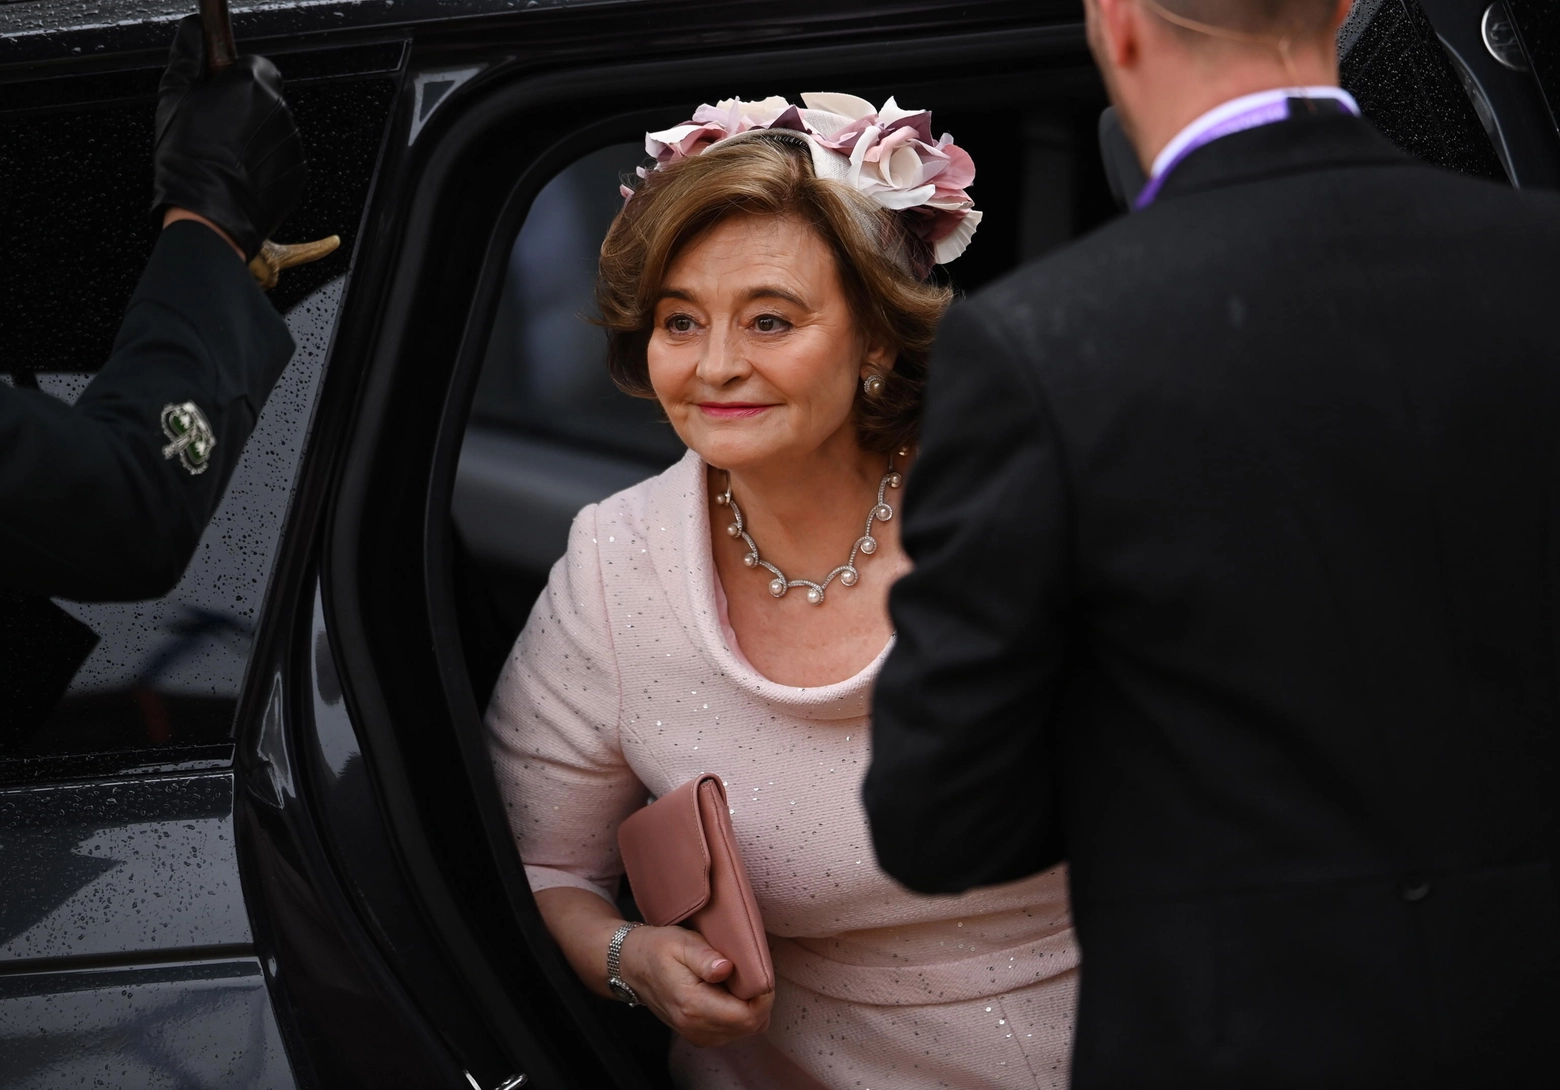 epa10611683 Cherie Blair, wife of former British Prime Minister Tony Blair, arrives for the Coronation of Britain's King Charles III and Queen Camilla at Westminster Abbey in London, Britain, 06 May 2023. Coronations of British Kings and Queens have taken place at Westminster Abbey for the last 900 years. The service will be attended by around 100 heads of state from around the world.  EPA/Andy Rain